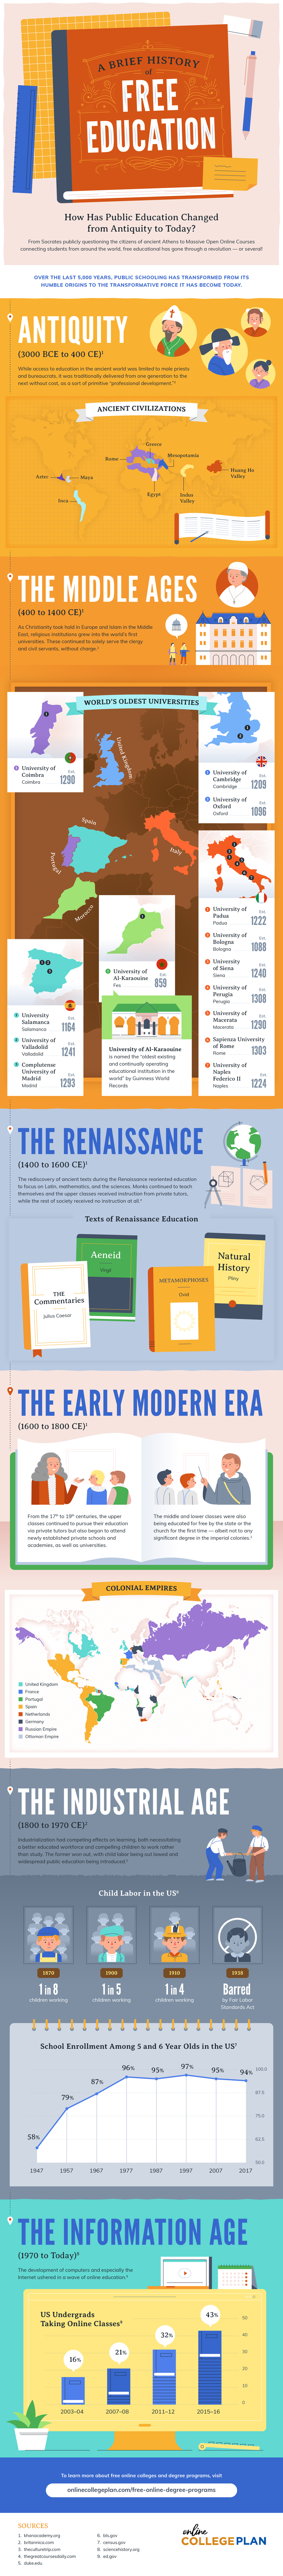 A Brief History Of Free Education A master's of business administration (mba) opens up career opportunities for management and leadership roles in a wide range of fields like marketing, finance, and consulting. a brief history of free education